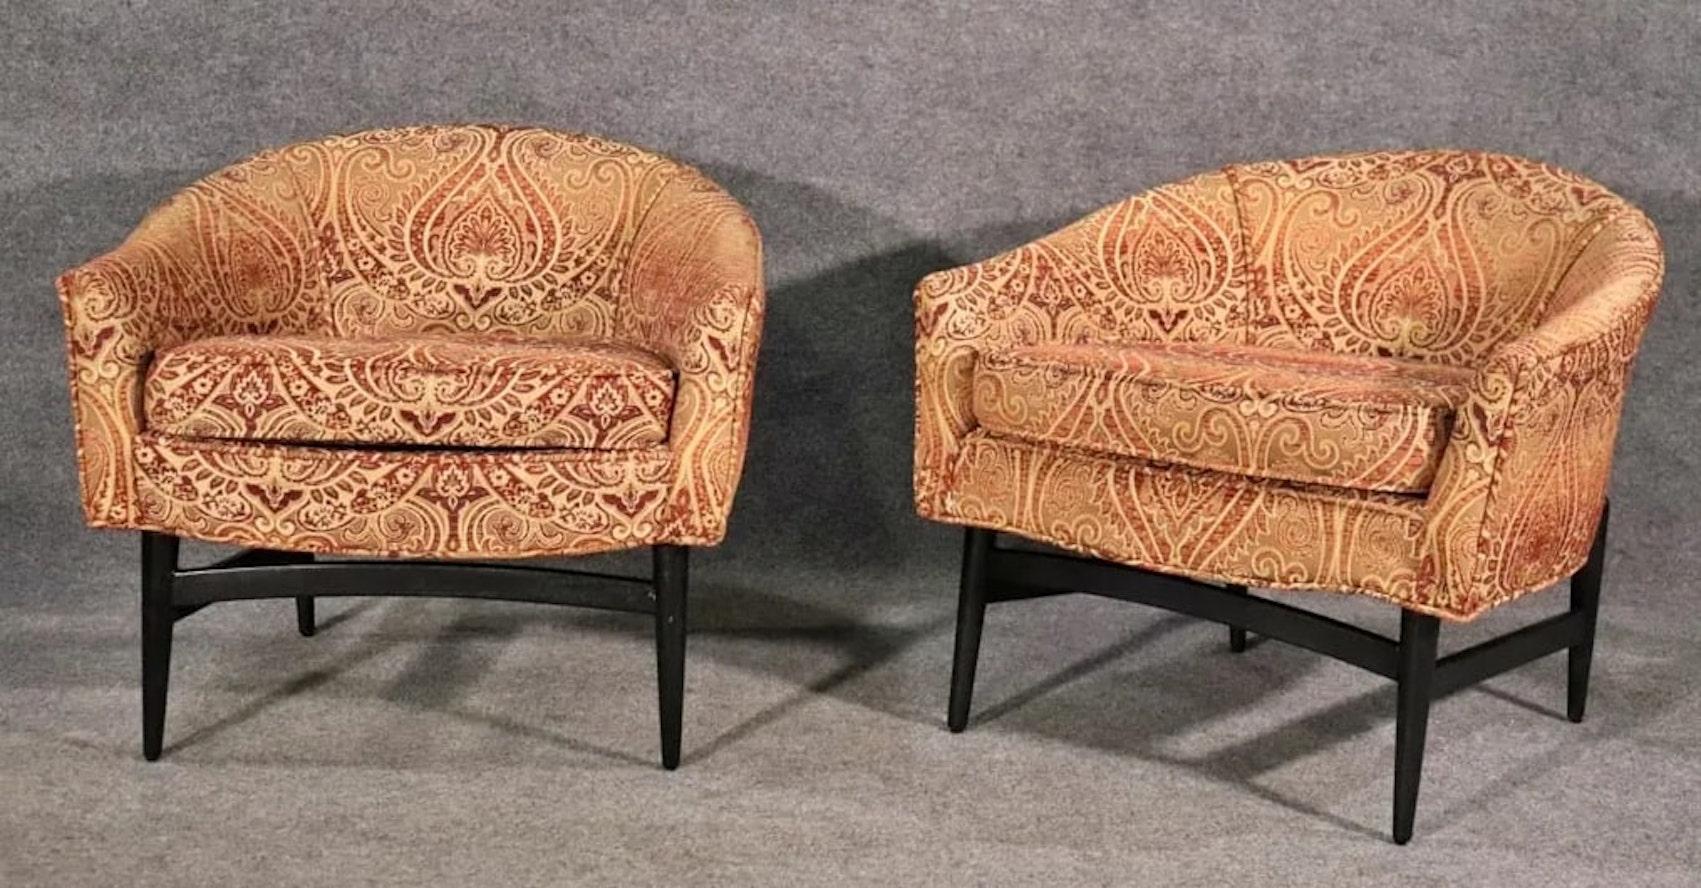 Pair of barrel back lounge chairs designed by Lawrence Peabody. Black painted wood base under a rounded frame.
Please confirm location NY or NJ